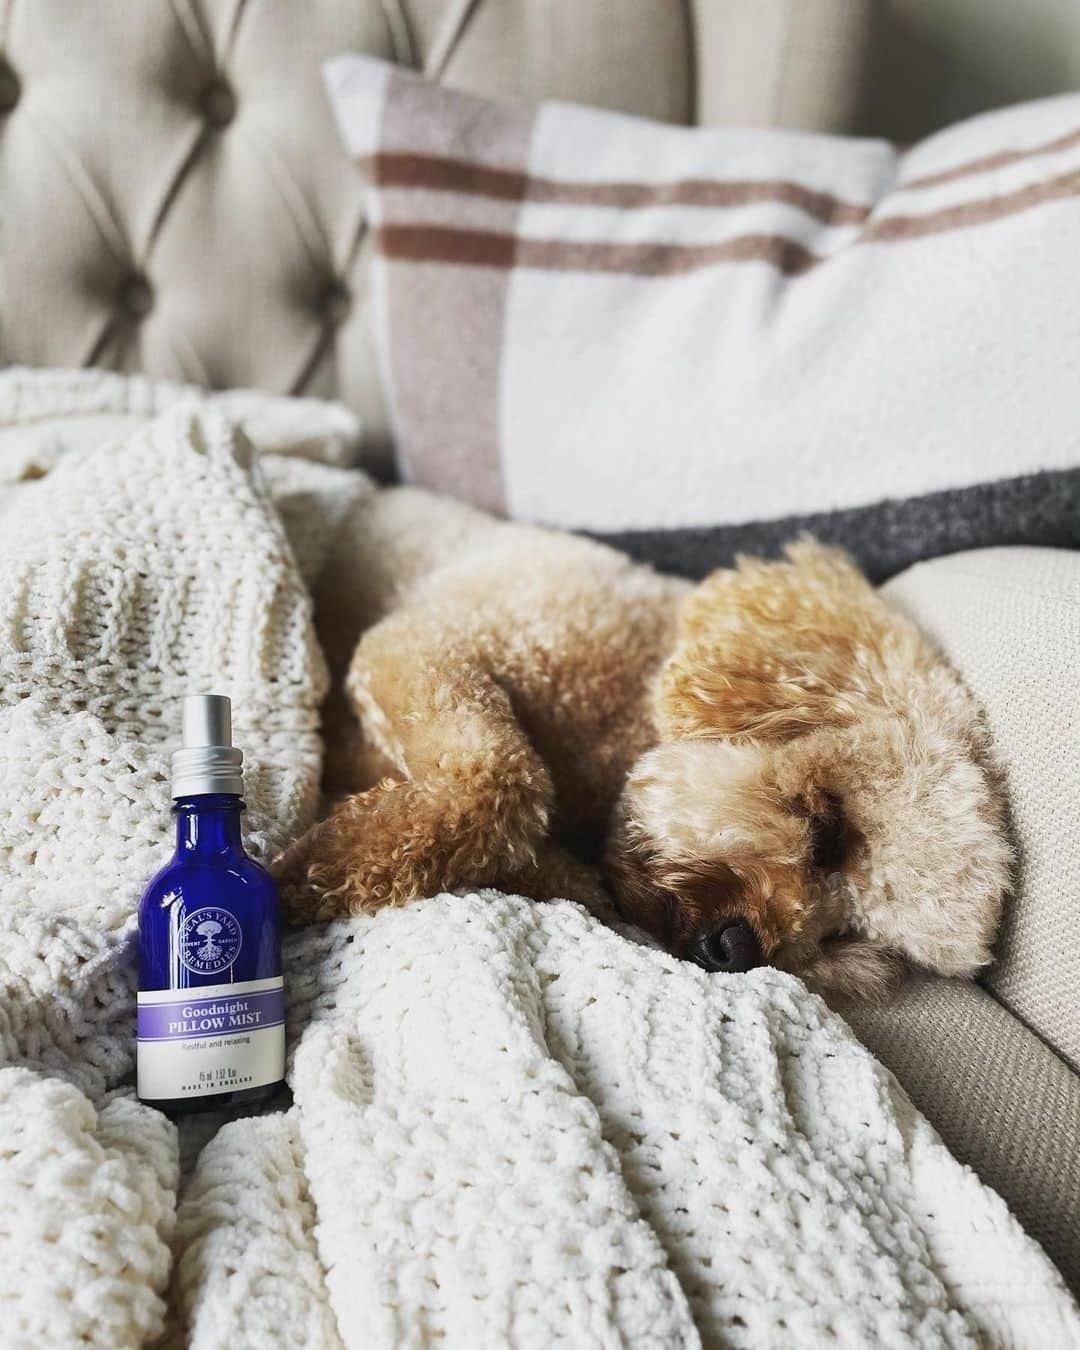 Neal's Yard Remediesのインスタグラム：「Wake up feeling refreshed with Goodnight Pillow Mist 💤💫⁠ ⁠ Say hello to the secret to better sleep. 🌙✨ Our award-winning Goodnight Pillow Mist is your ultimate bedtime companion, designed to transform your sleep from the very first night*. 💤🌿⁠ ⁠ 💆‍♀️ Restful and relaxing: Immerse yourself in the tranquil blend of organic lavender, vetiver, and mandarin essential oils. Experience a sense of calm that sets the stage for a peaceful night. ⁠ ⁠ Proven results🌙...⁠ ⁠ Improve Your Sleep from the Very First Night*⁠ 81% Found Goodnight Pillow Mist Helped Calm and Relax*⁠ 74% Found Goodnight Pillow Mist Aids a Peaceful Night's Sleep*⁠ 71% Would Recommend Goodnight Pillow Mist to Someone with Sleep Issues*⁠ 69% Fell Asleep Quicker*⁠ ⁠ *Based on a consumer trial of 100 participants⁠ ⁠ Tap to shop.⁠ ⁠」